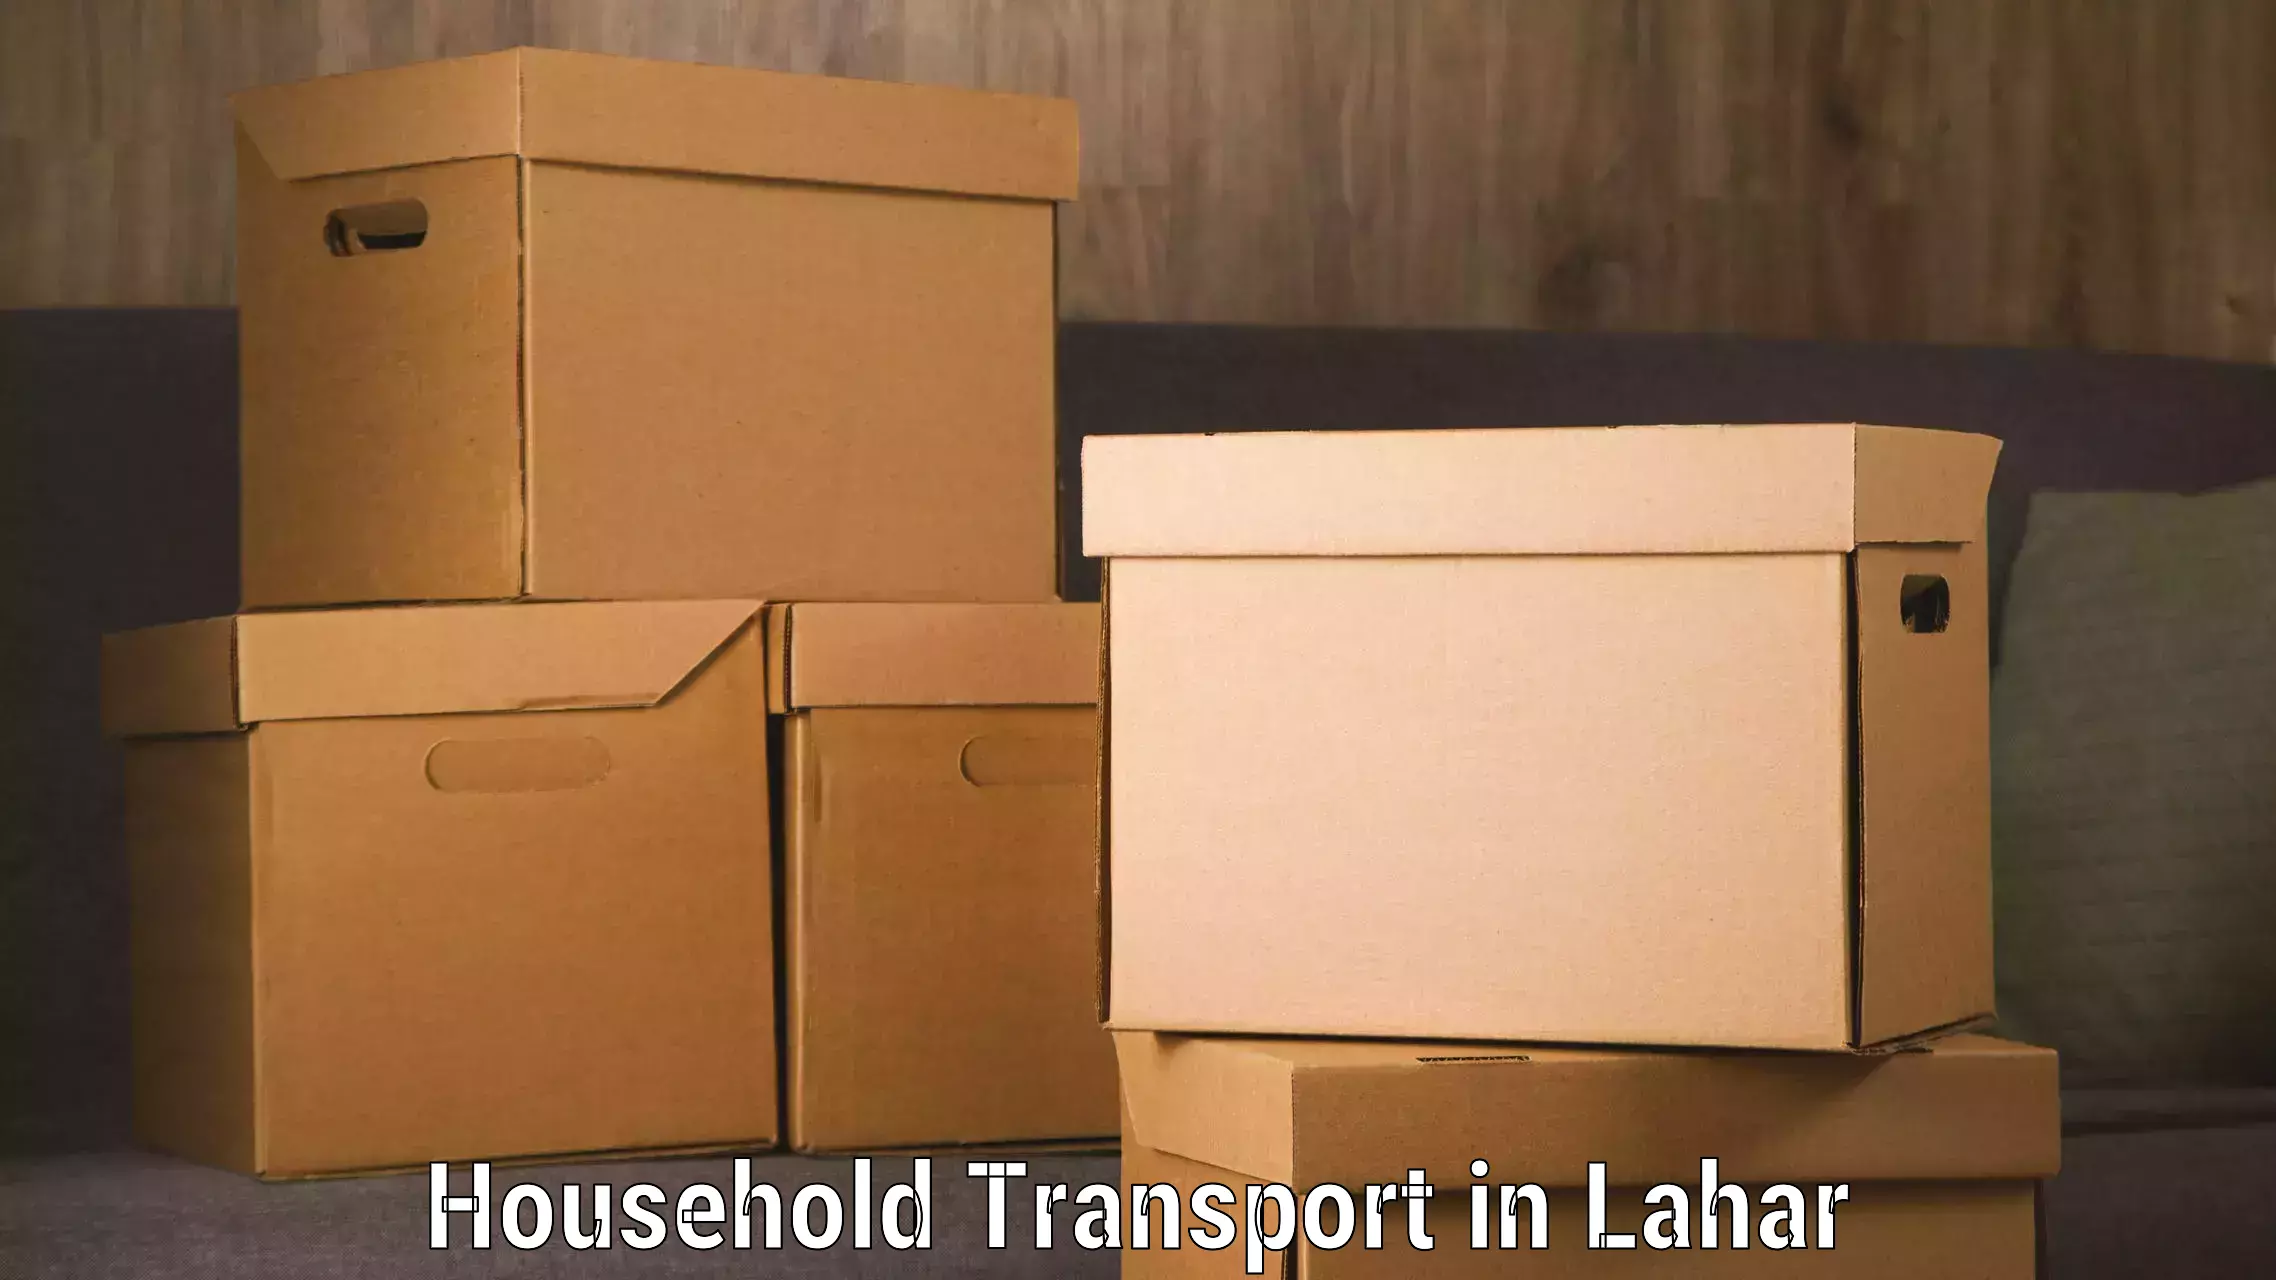 Furniture delivery service in Lahar